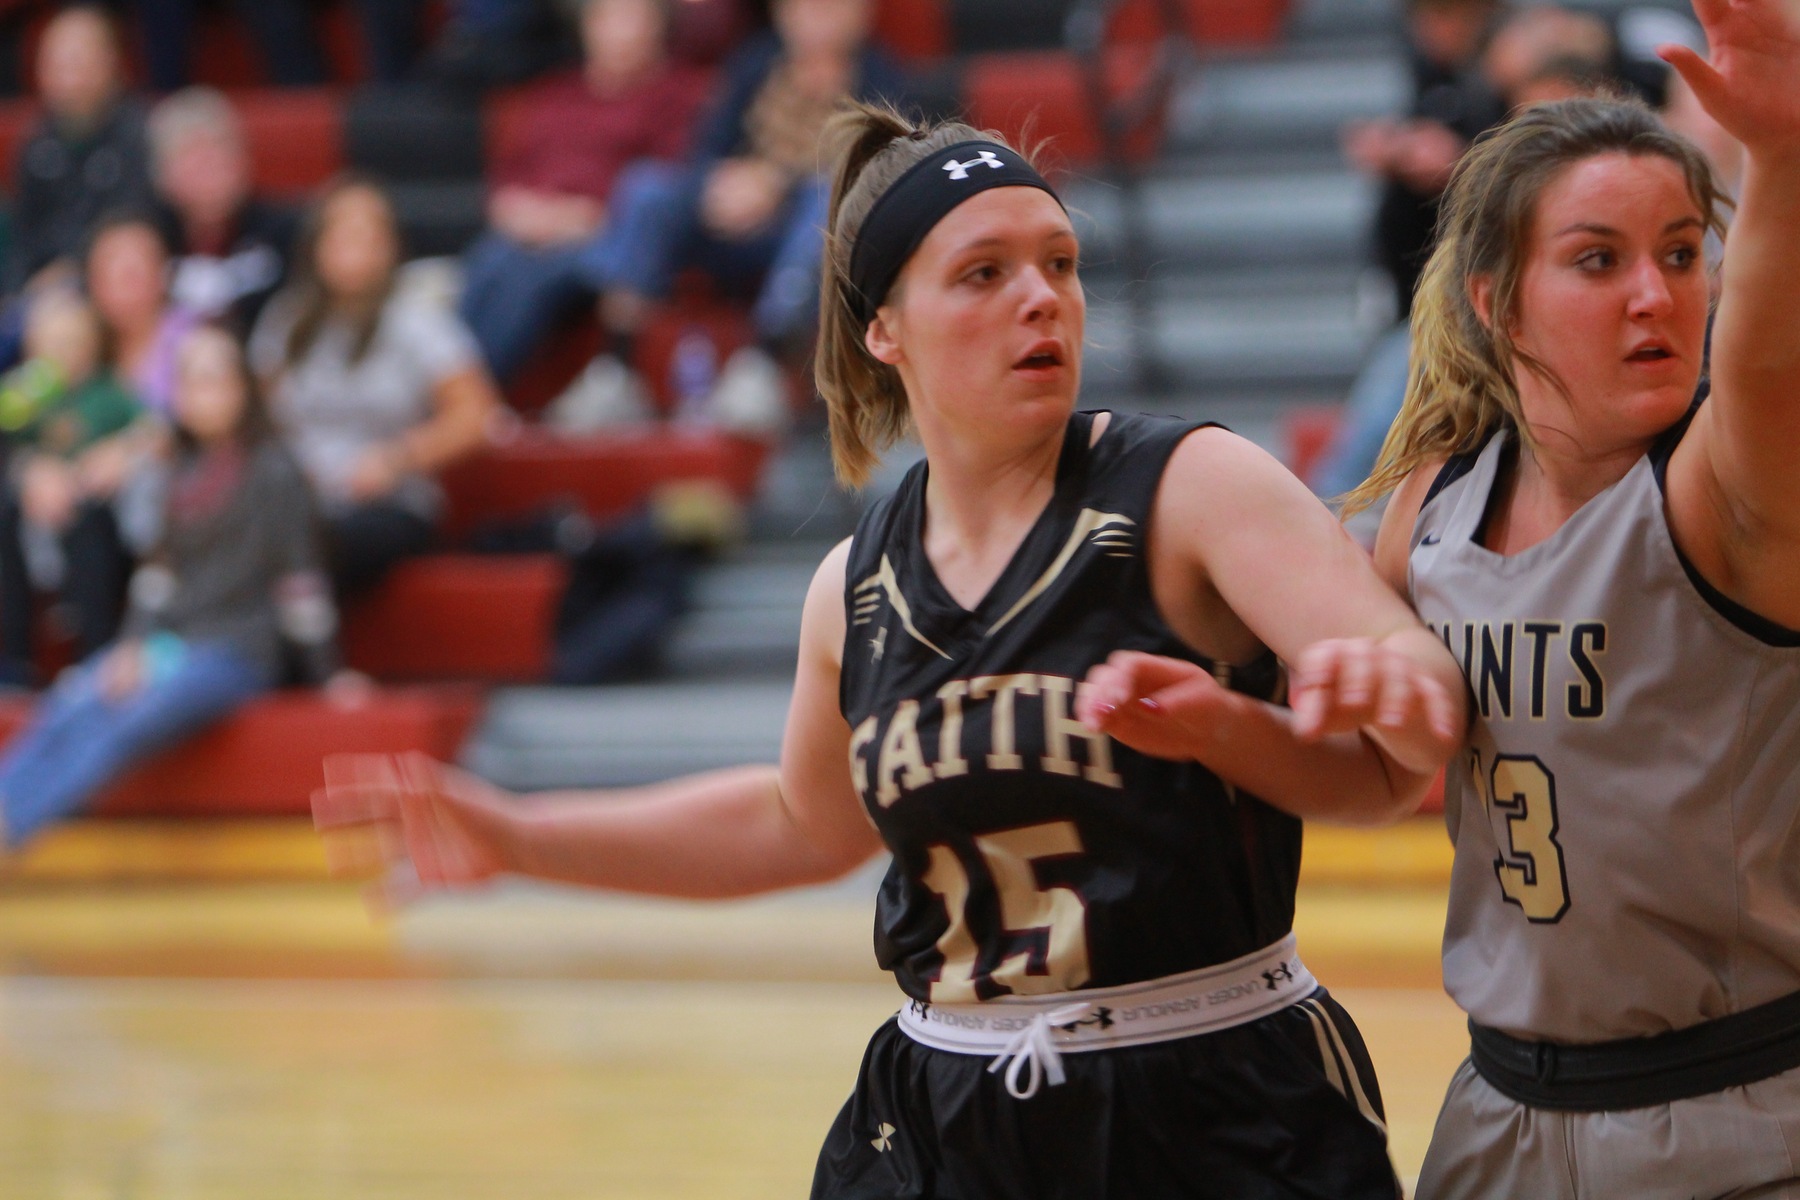 Michaela Crider led the Faith Eagles with 10 points against North Central in a 70-29 loss.